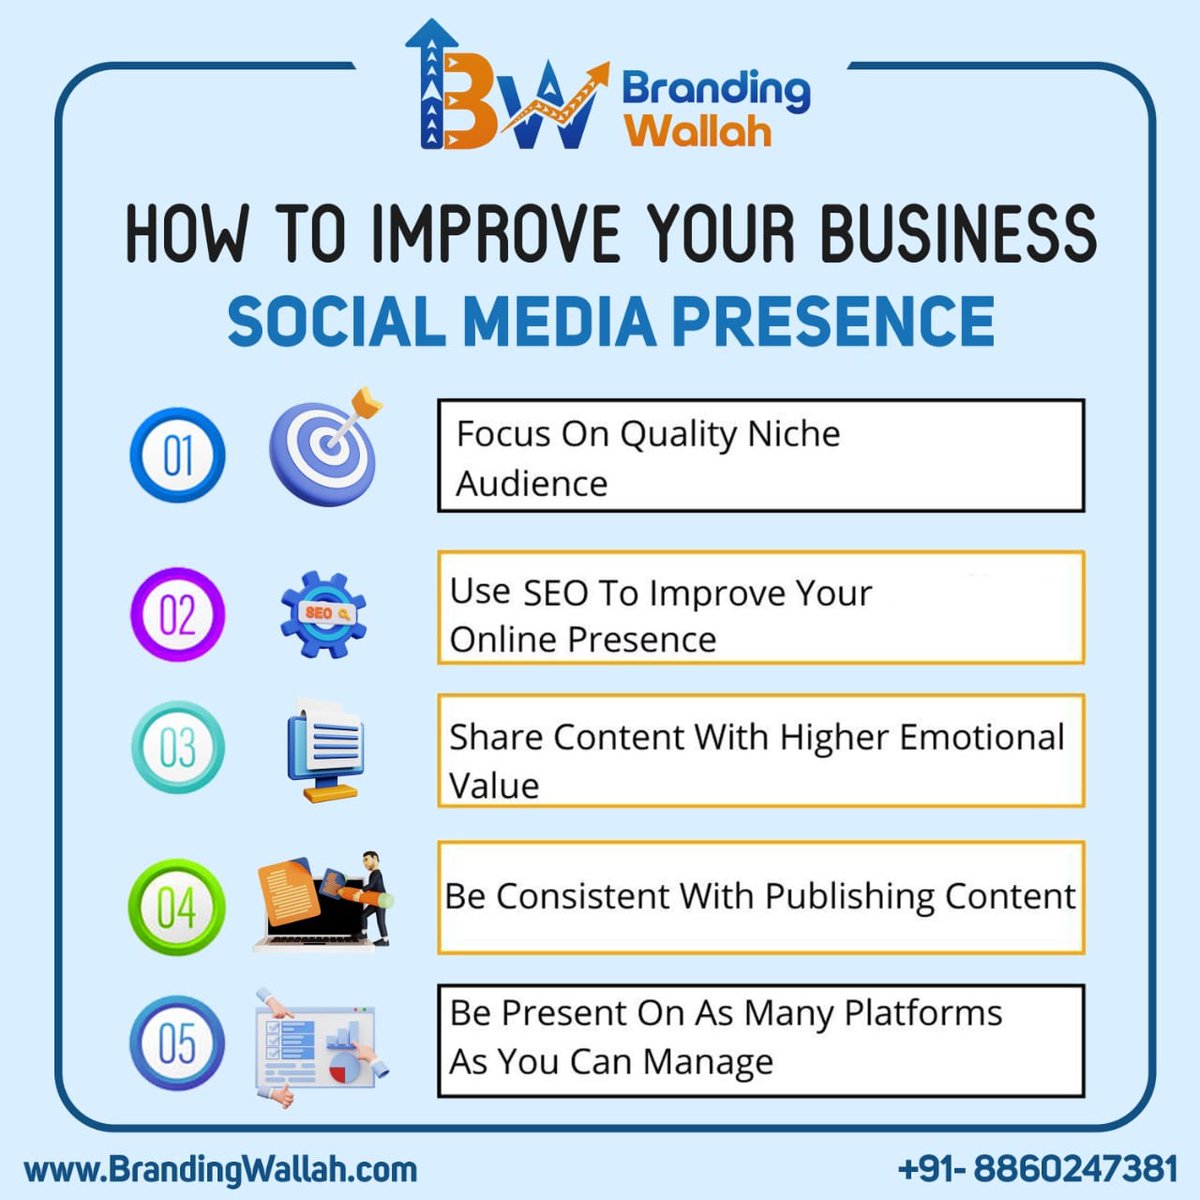 How to improve your business social media presence
.
.
.
.
#growth #growthisaprocess #growthisuncomfortable #comfortable #smallbusinessowner #enterpreneur #businessmotivation #smallbusinessmotivation #smallbusinesstips #smallbusinesstipsforwomen #smallbusinessowner #finance